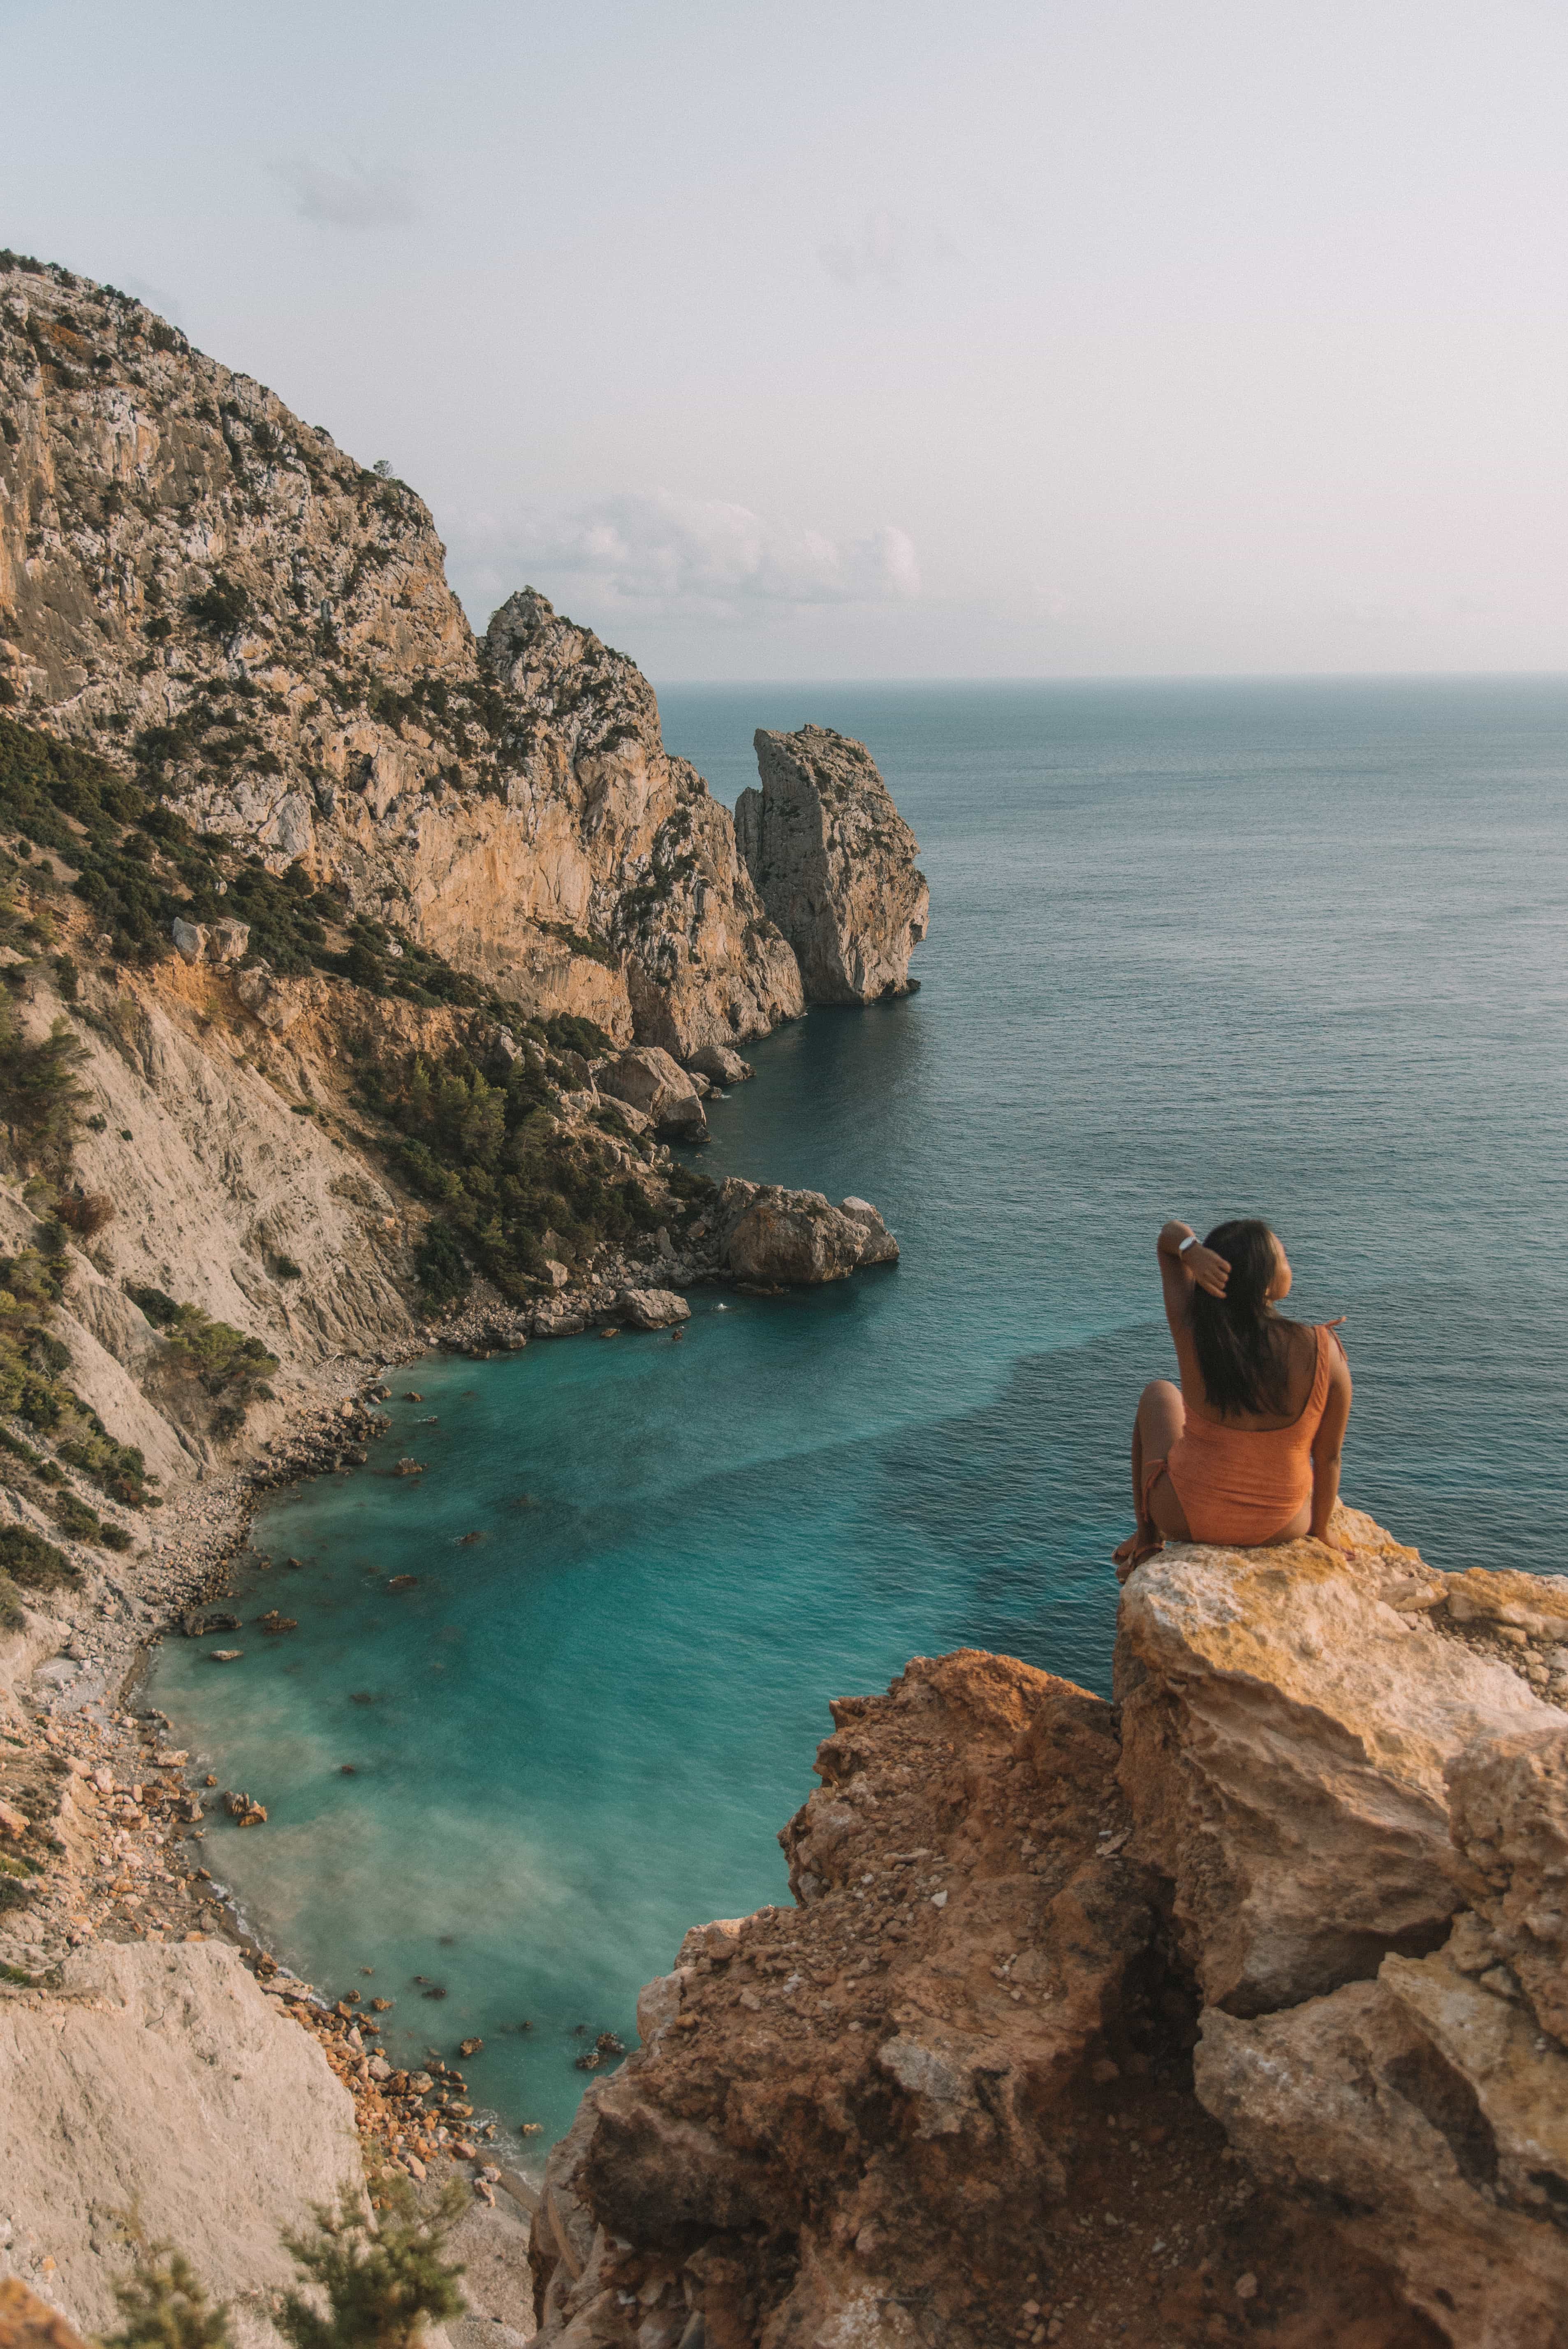 things to do in Ibiza, places to visit in Ibiza, festivals in Ibiza, best time to visit Ibiza, daily budget in Ibiza, food to try in Ibiza, how to get to Ibiza, road trip Ibiza, beaches  in Ibiza, instagrammable places in ibiza, Ibiza instagram spots, Es Vedra